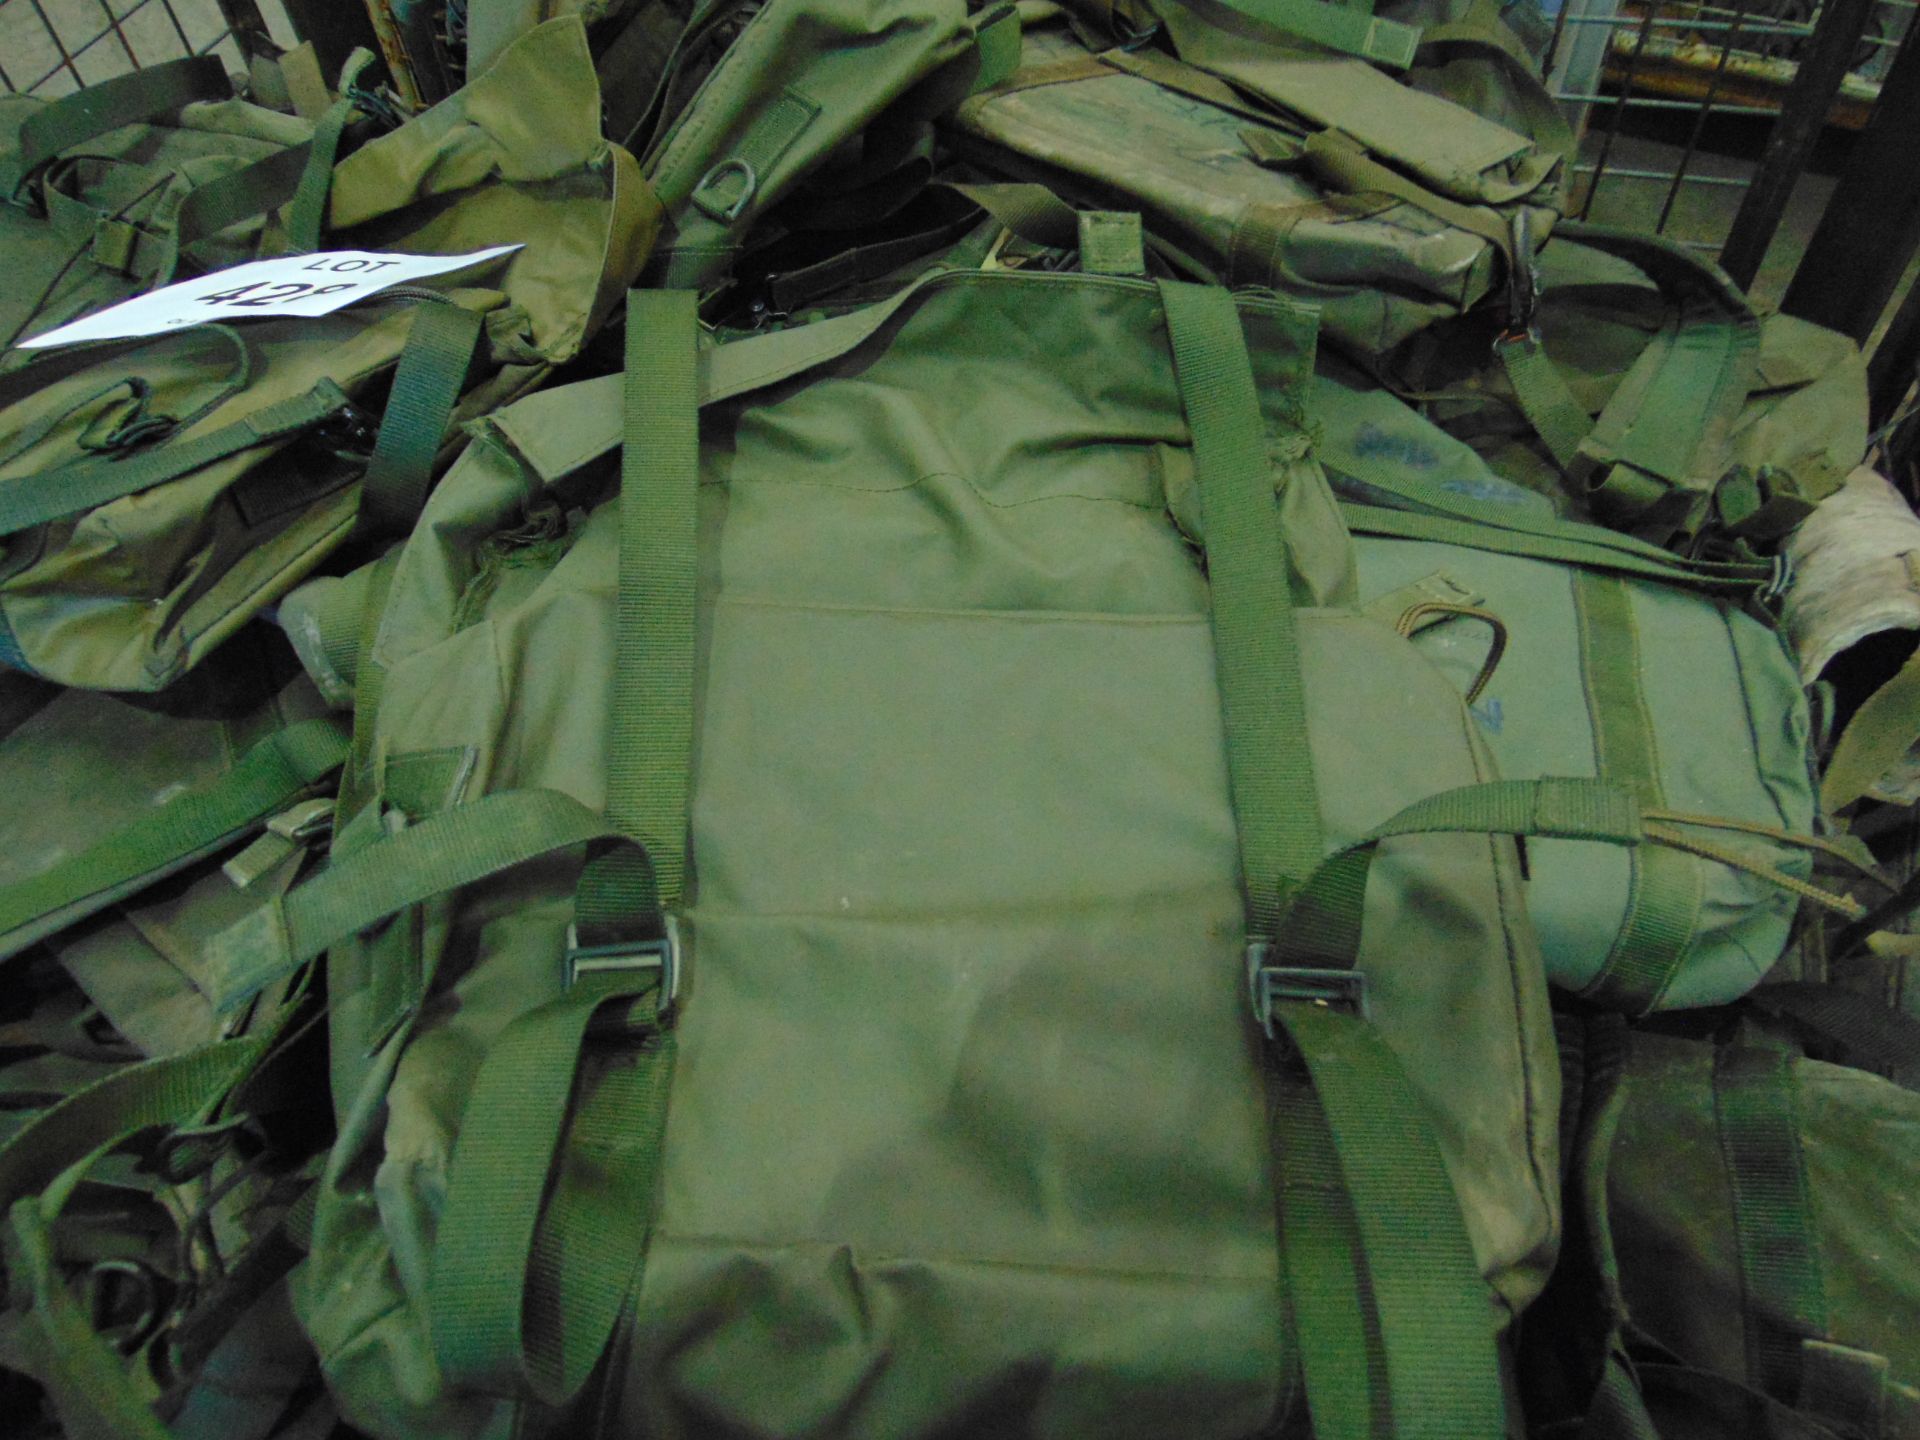 1X STILLAGE OF COMMS BAGS, ANTENA COVERS, ETC - Image 8 of 9